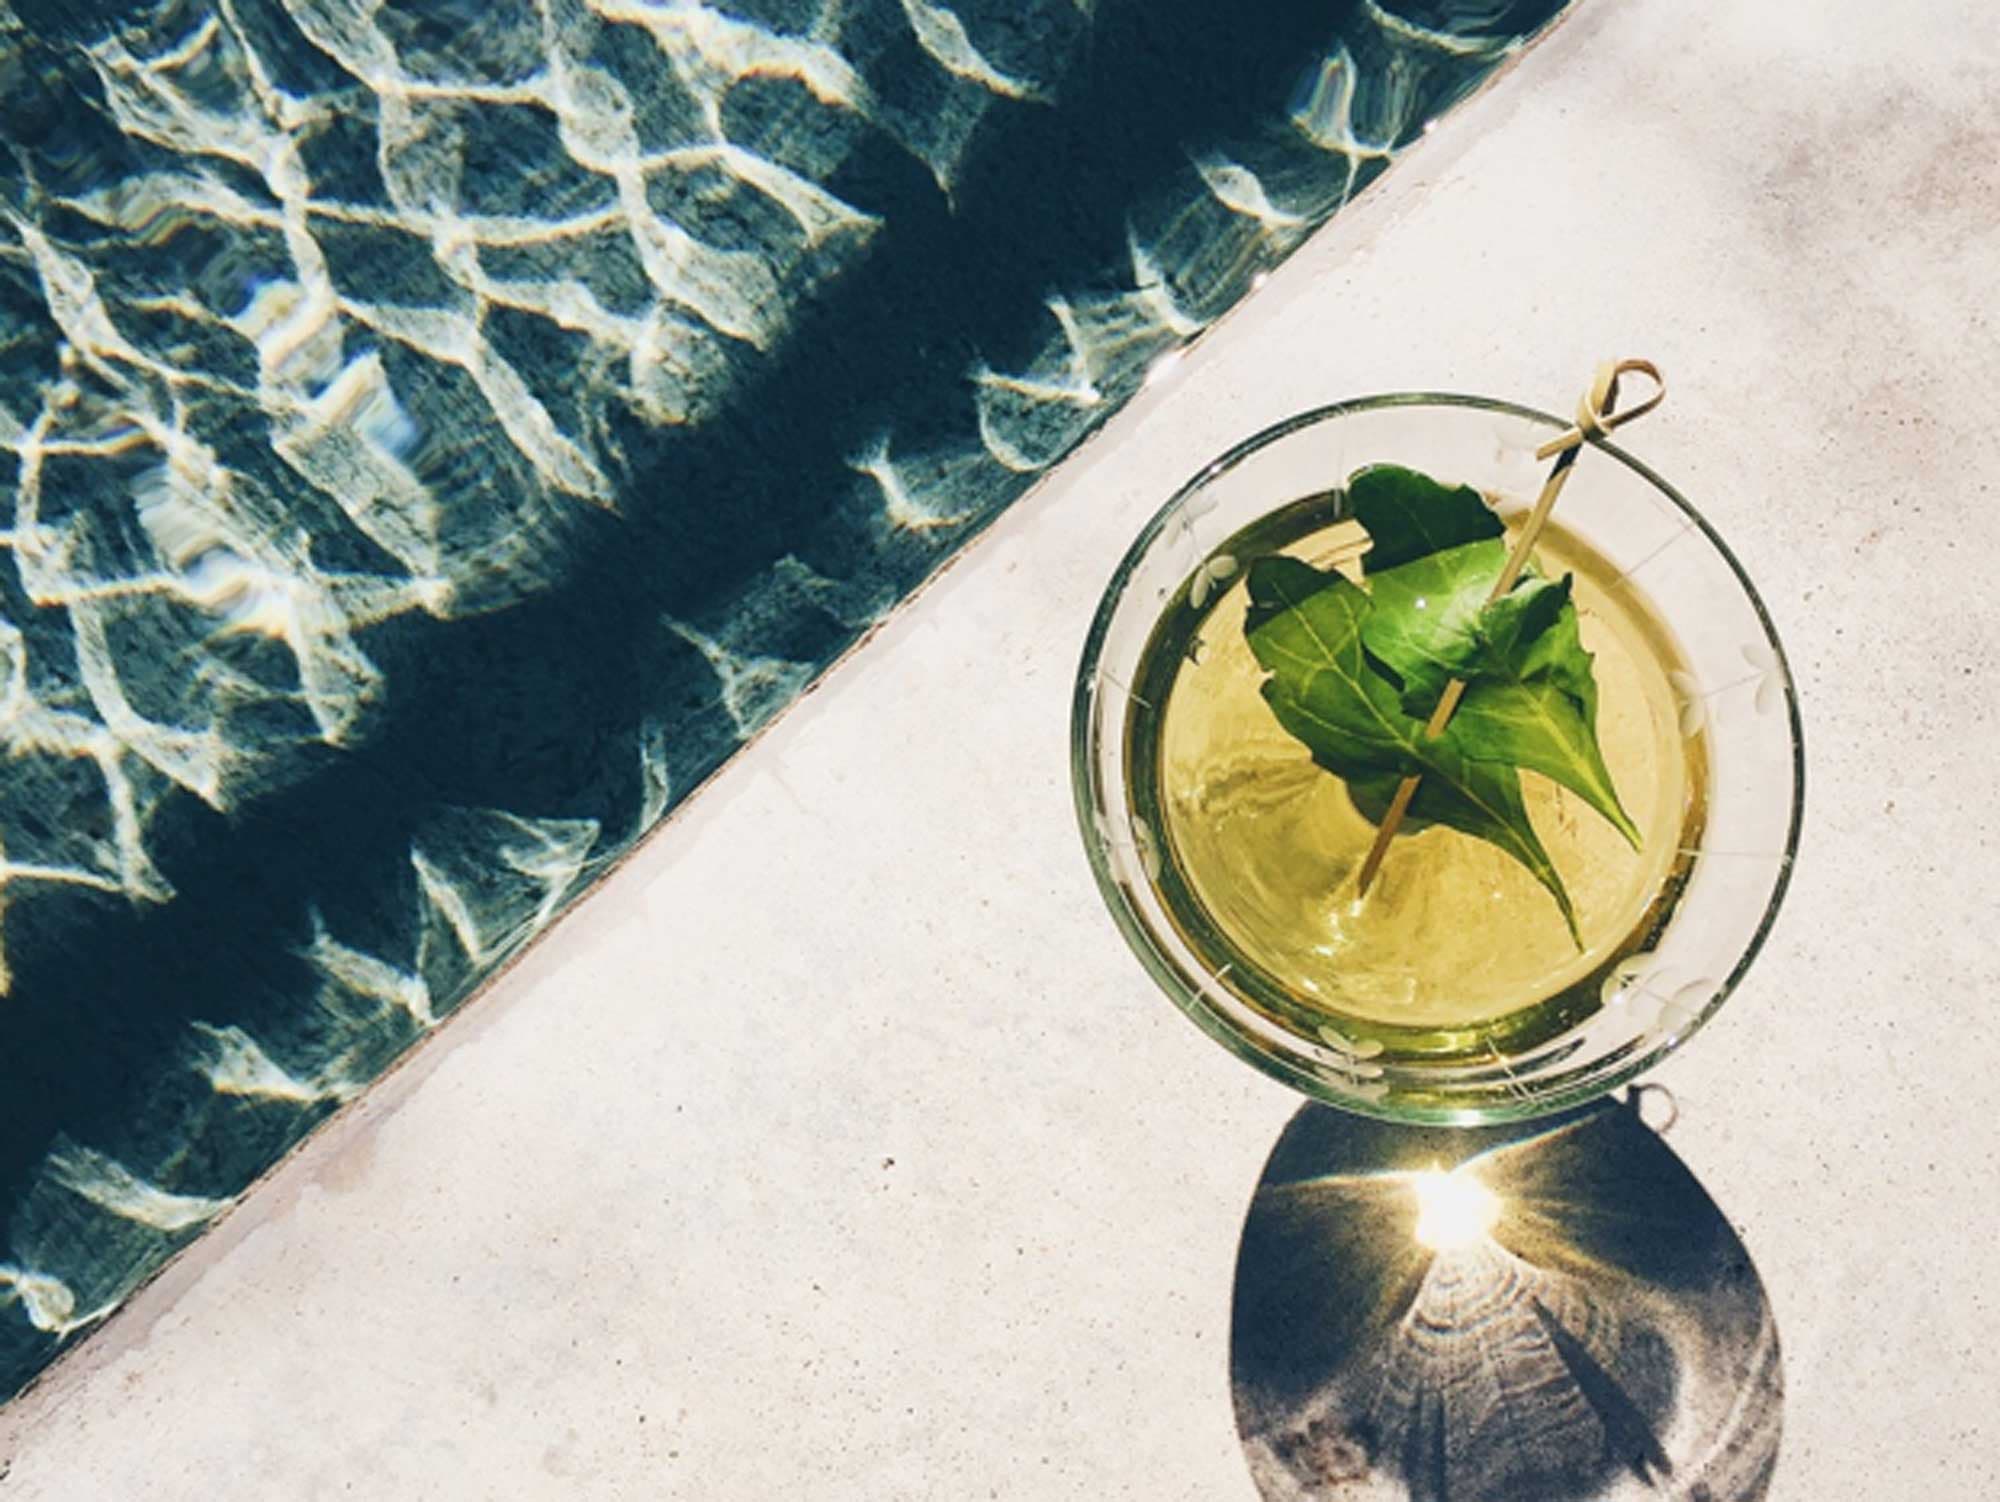 Epazote-infused gin martini by the pool